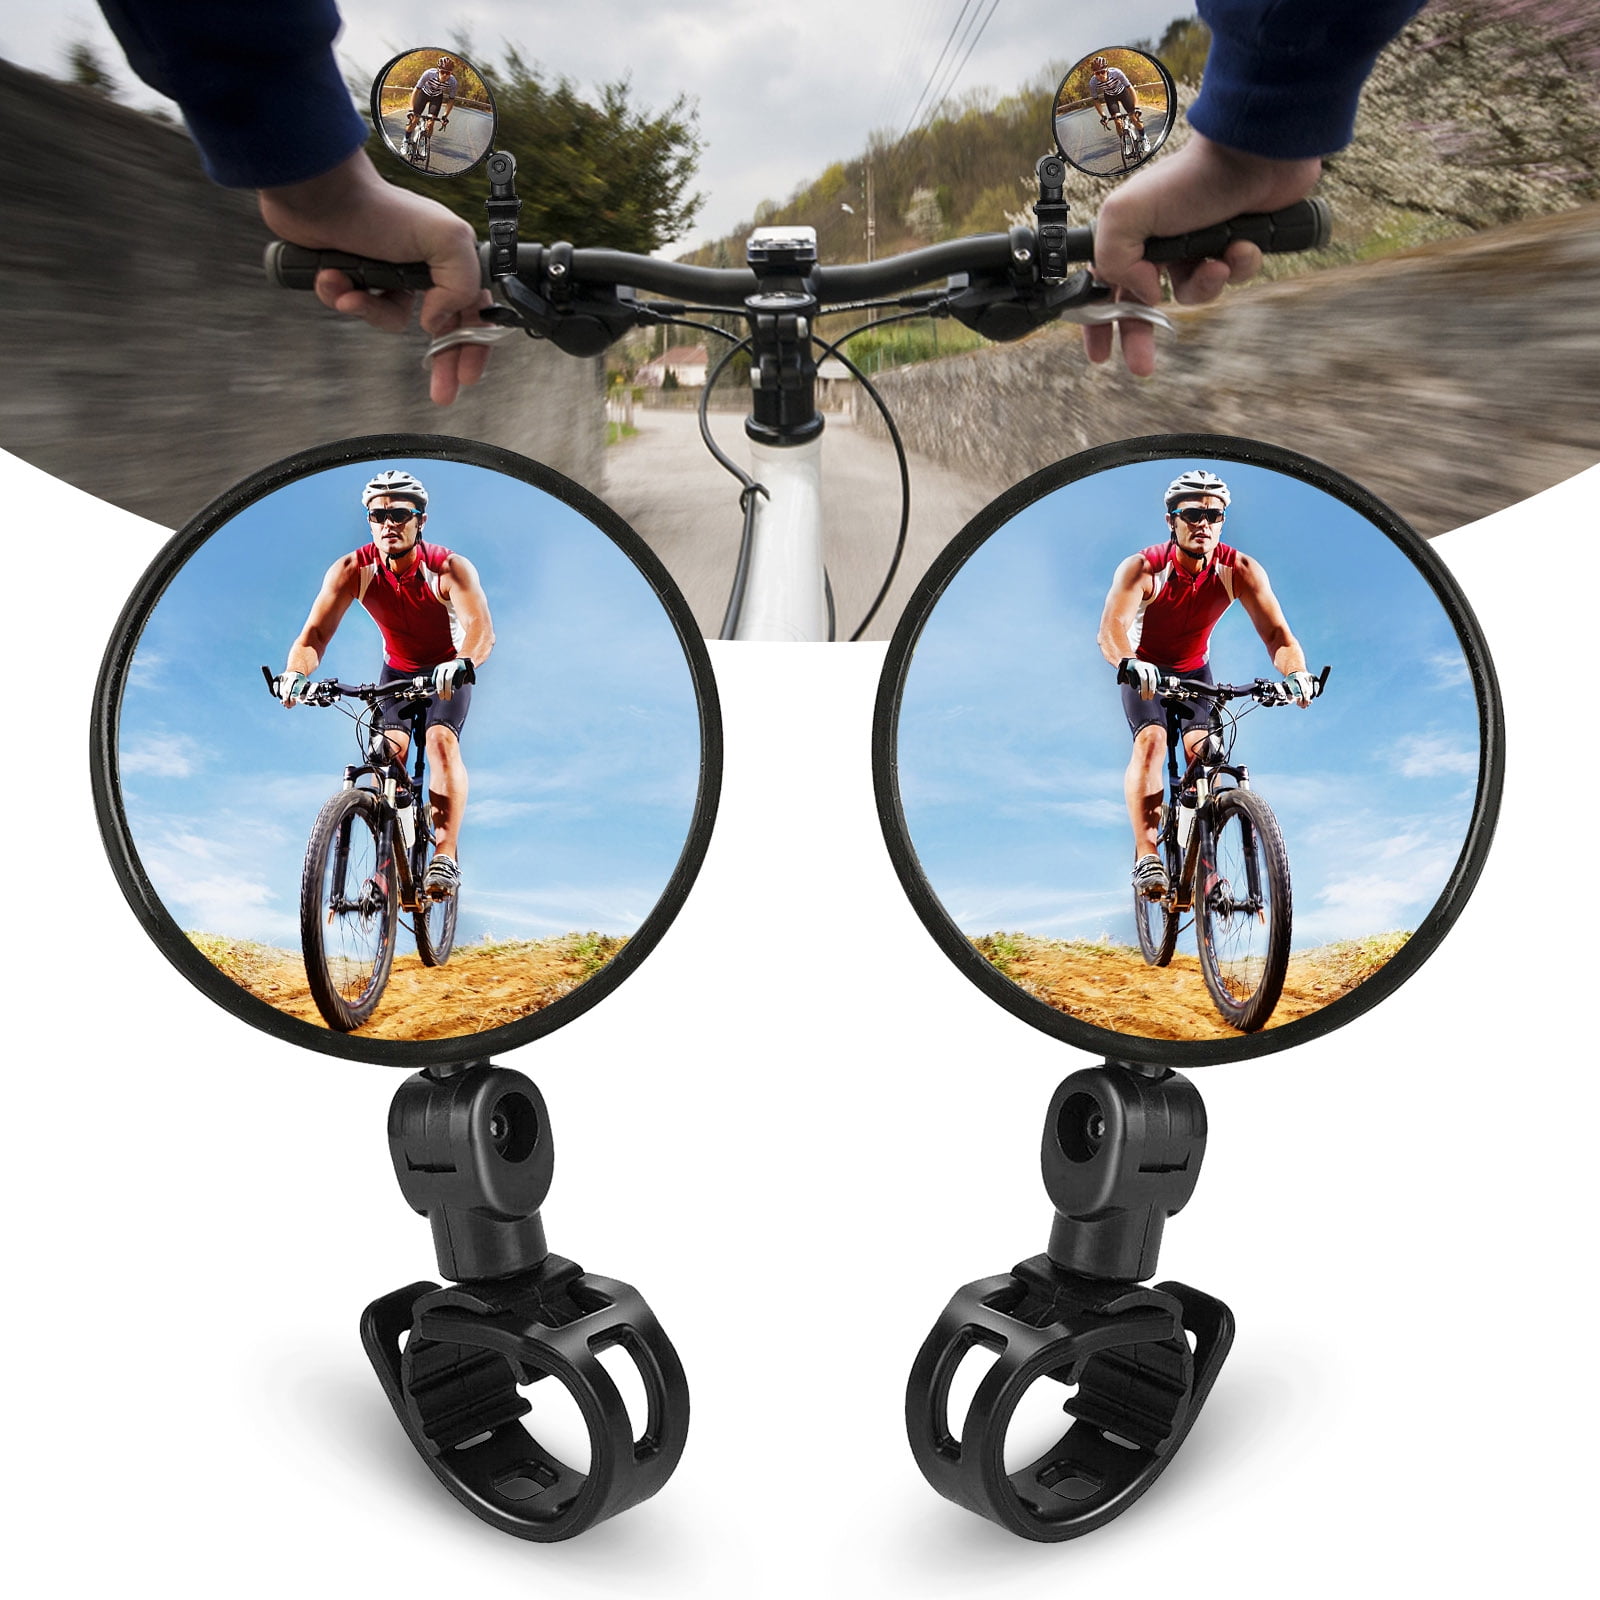 Safe Rearview Mirror Bicycle Cycling Rear View Mirrors Adjustable Rotatable Handlebar Mounted Convex Glass Mirror for Mountain Road Bike 2PCS Bike Mirrors 